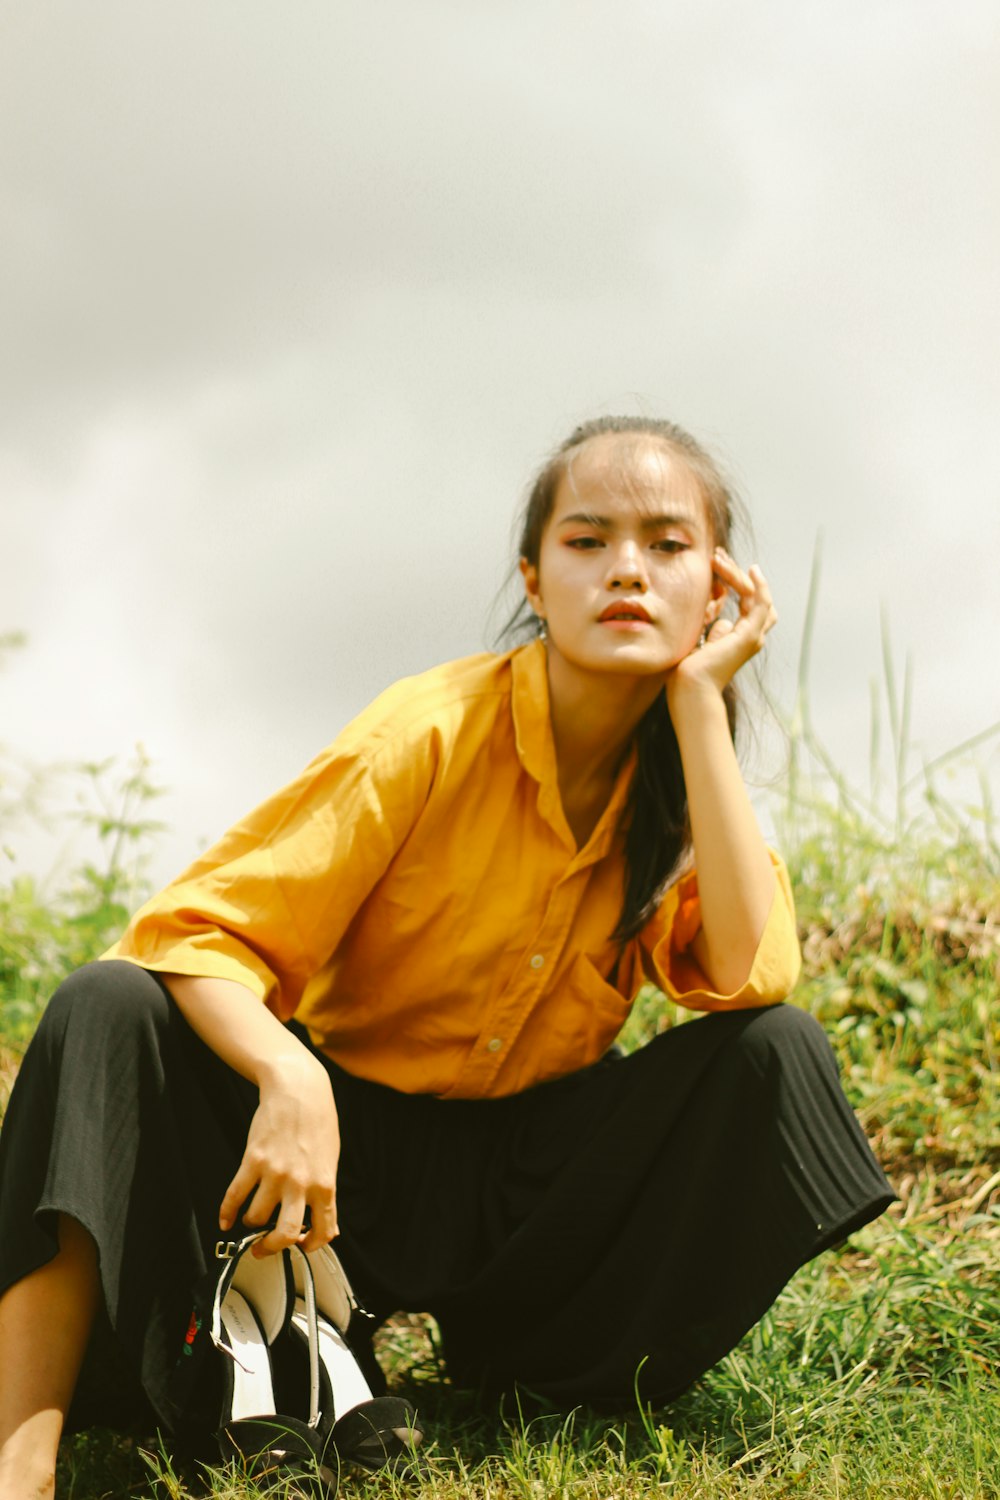 woman in yellow dress shirt and black skirt sitting on green grass during daytime